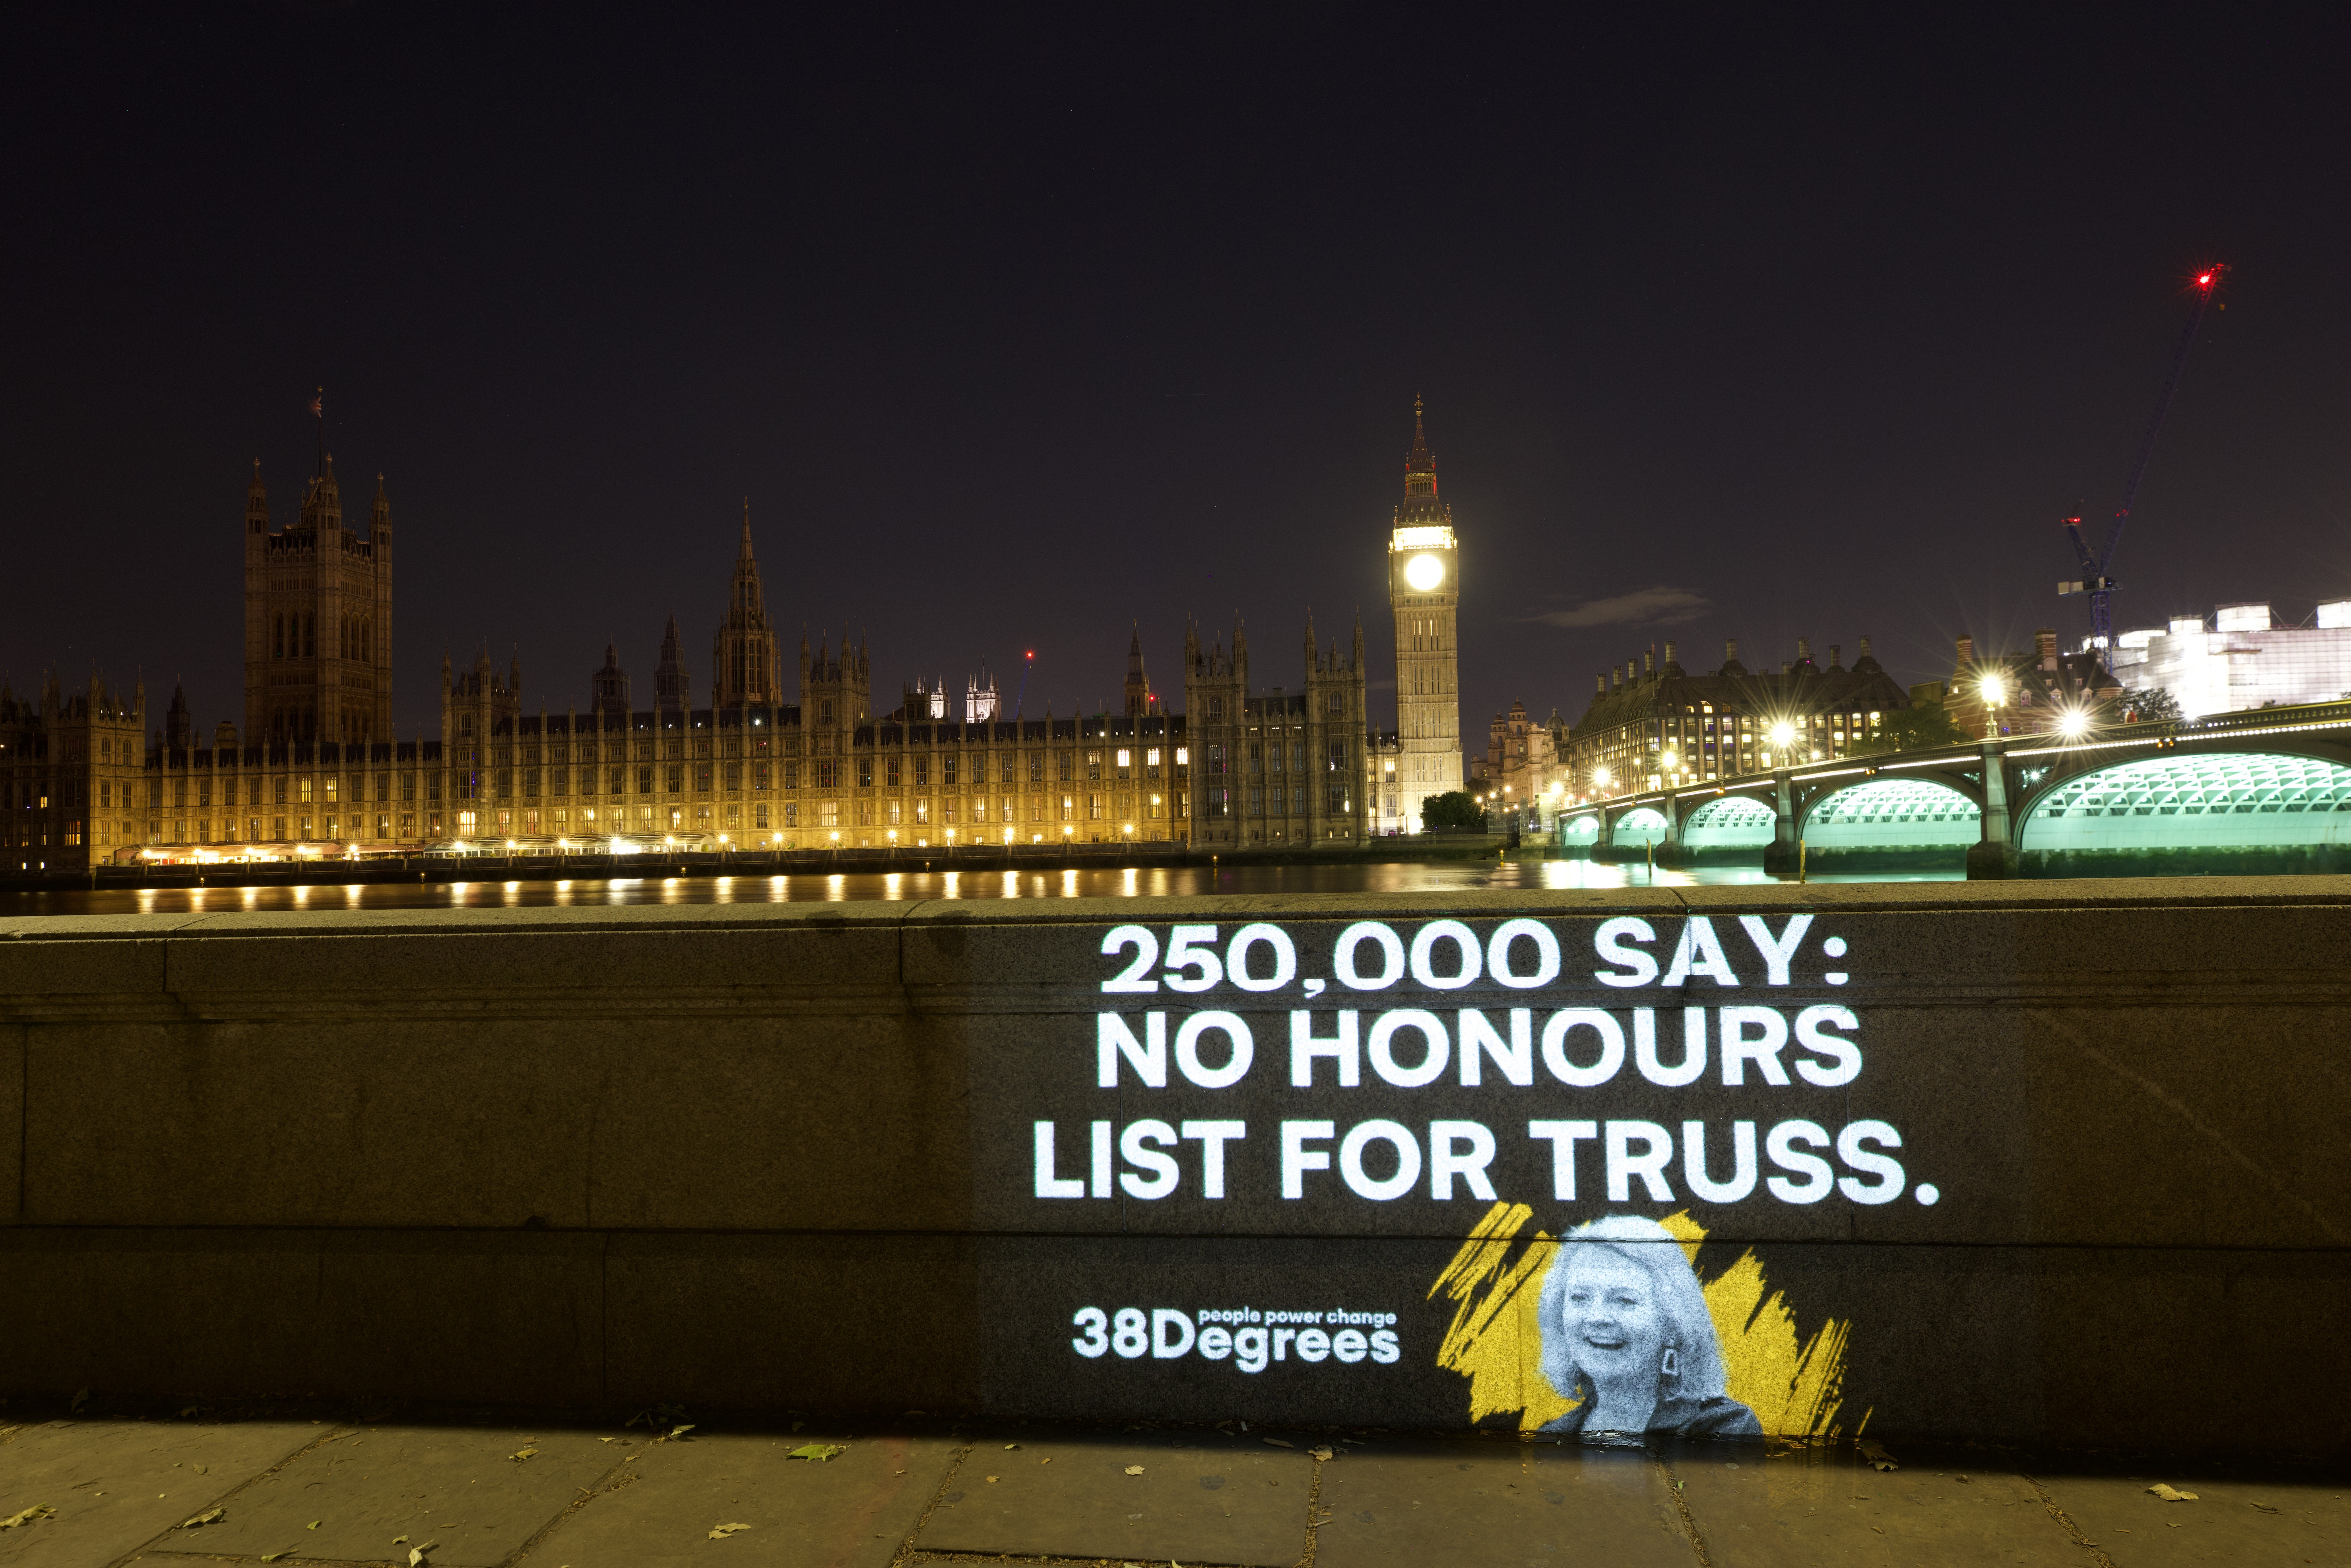 Projection reading 250,000 say no honours list for Truss. Westminster in background.